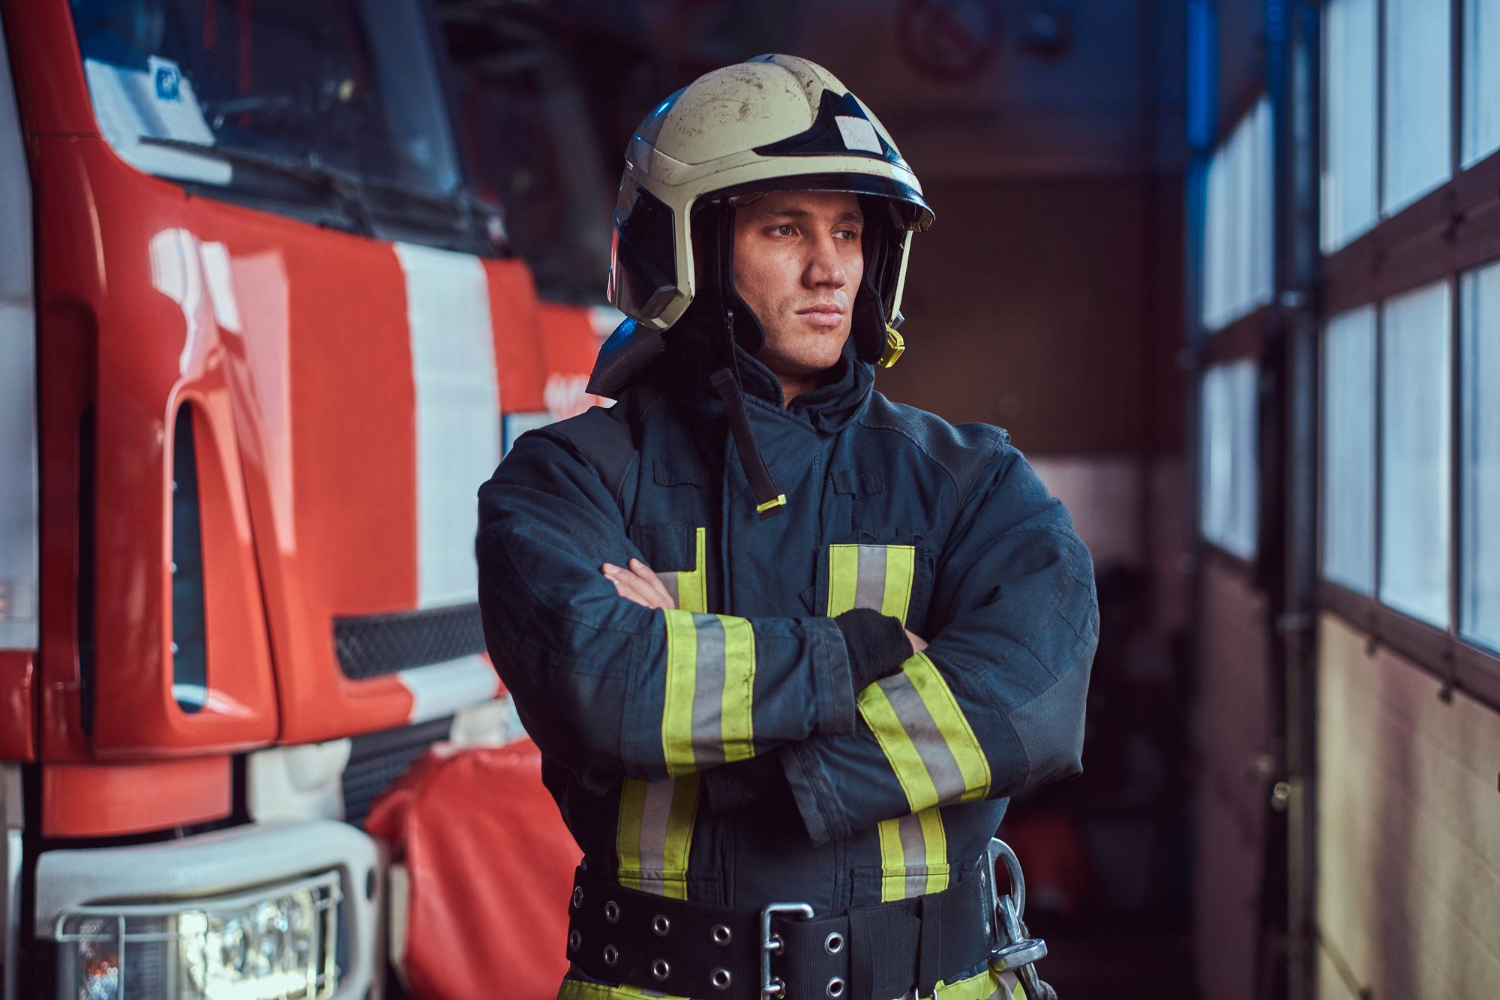 A male firefighter stands inside a firehouse, in front of a red fire truck. He's wearing a protective jacket and helmet, standing with his arms crossed, looking away from the camera.